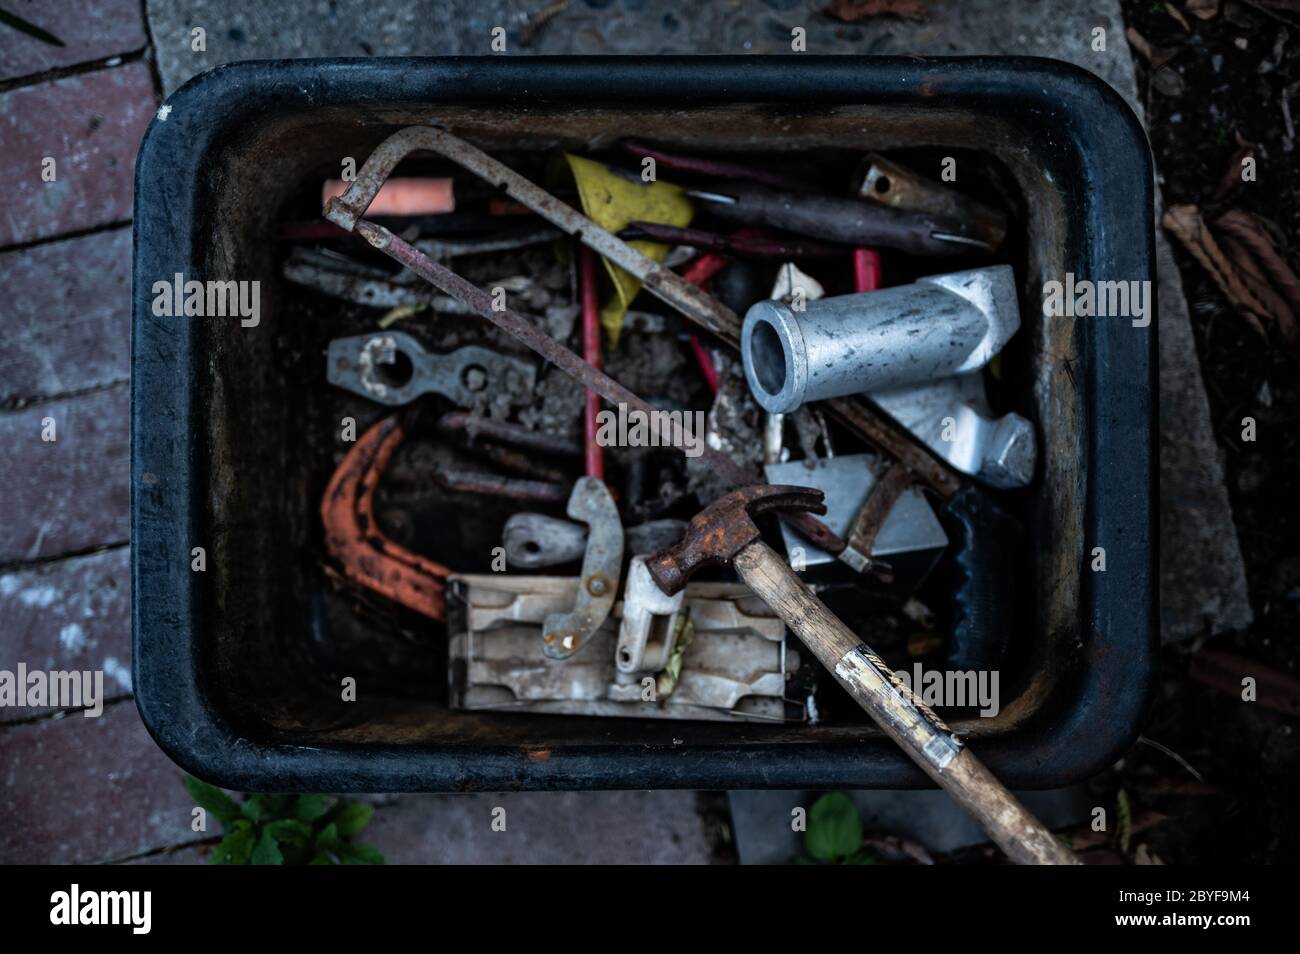 rusted metal tools, vintage old Stock Photo